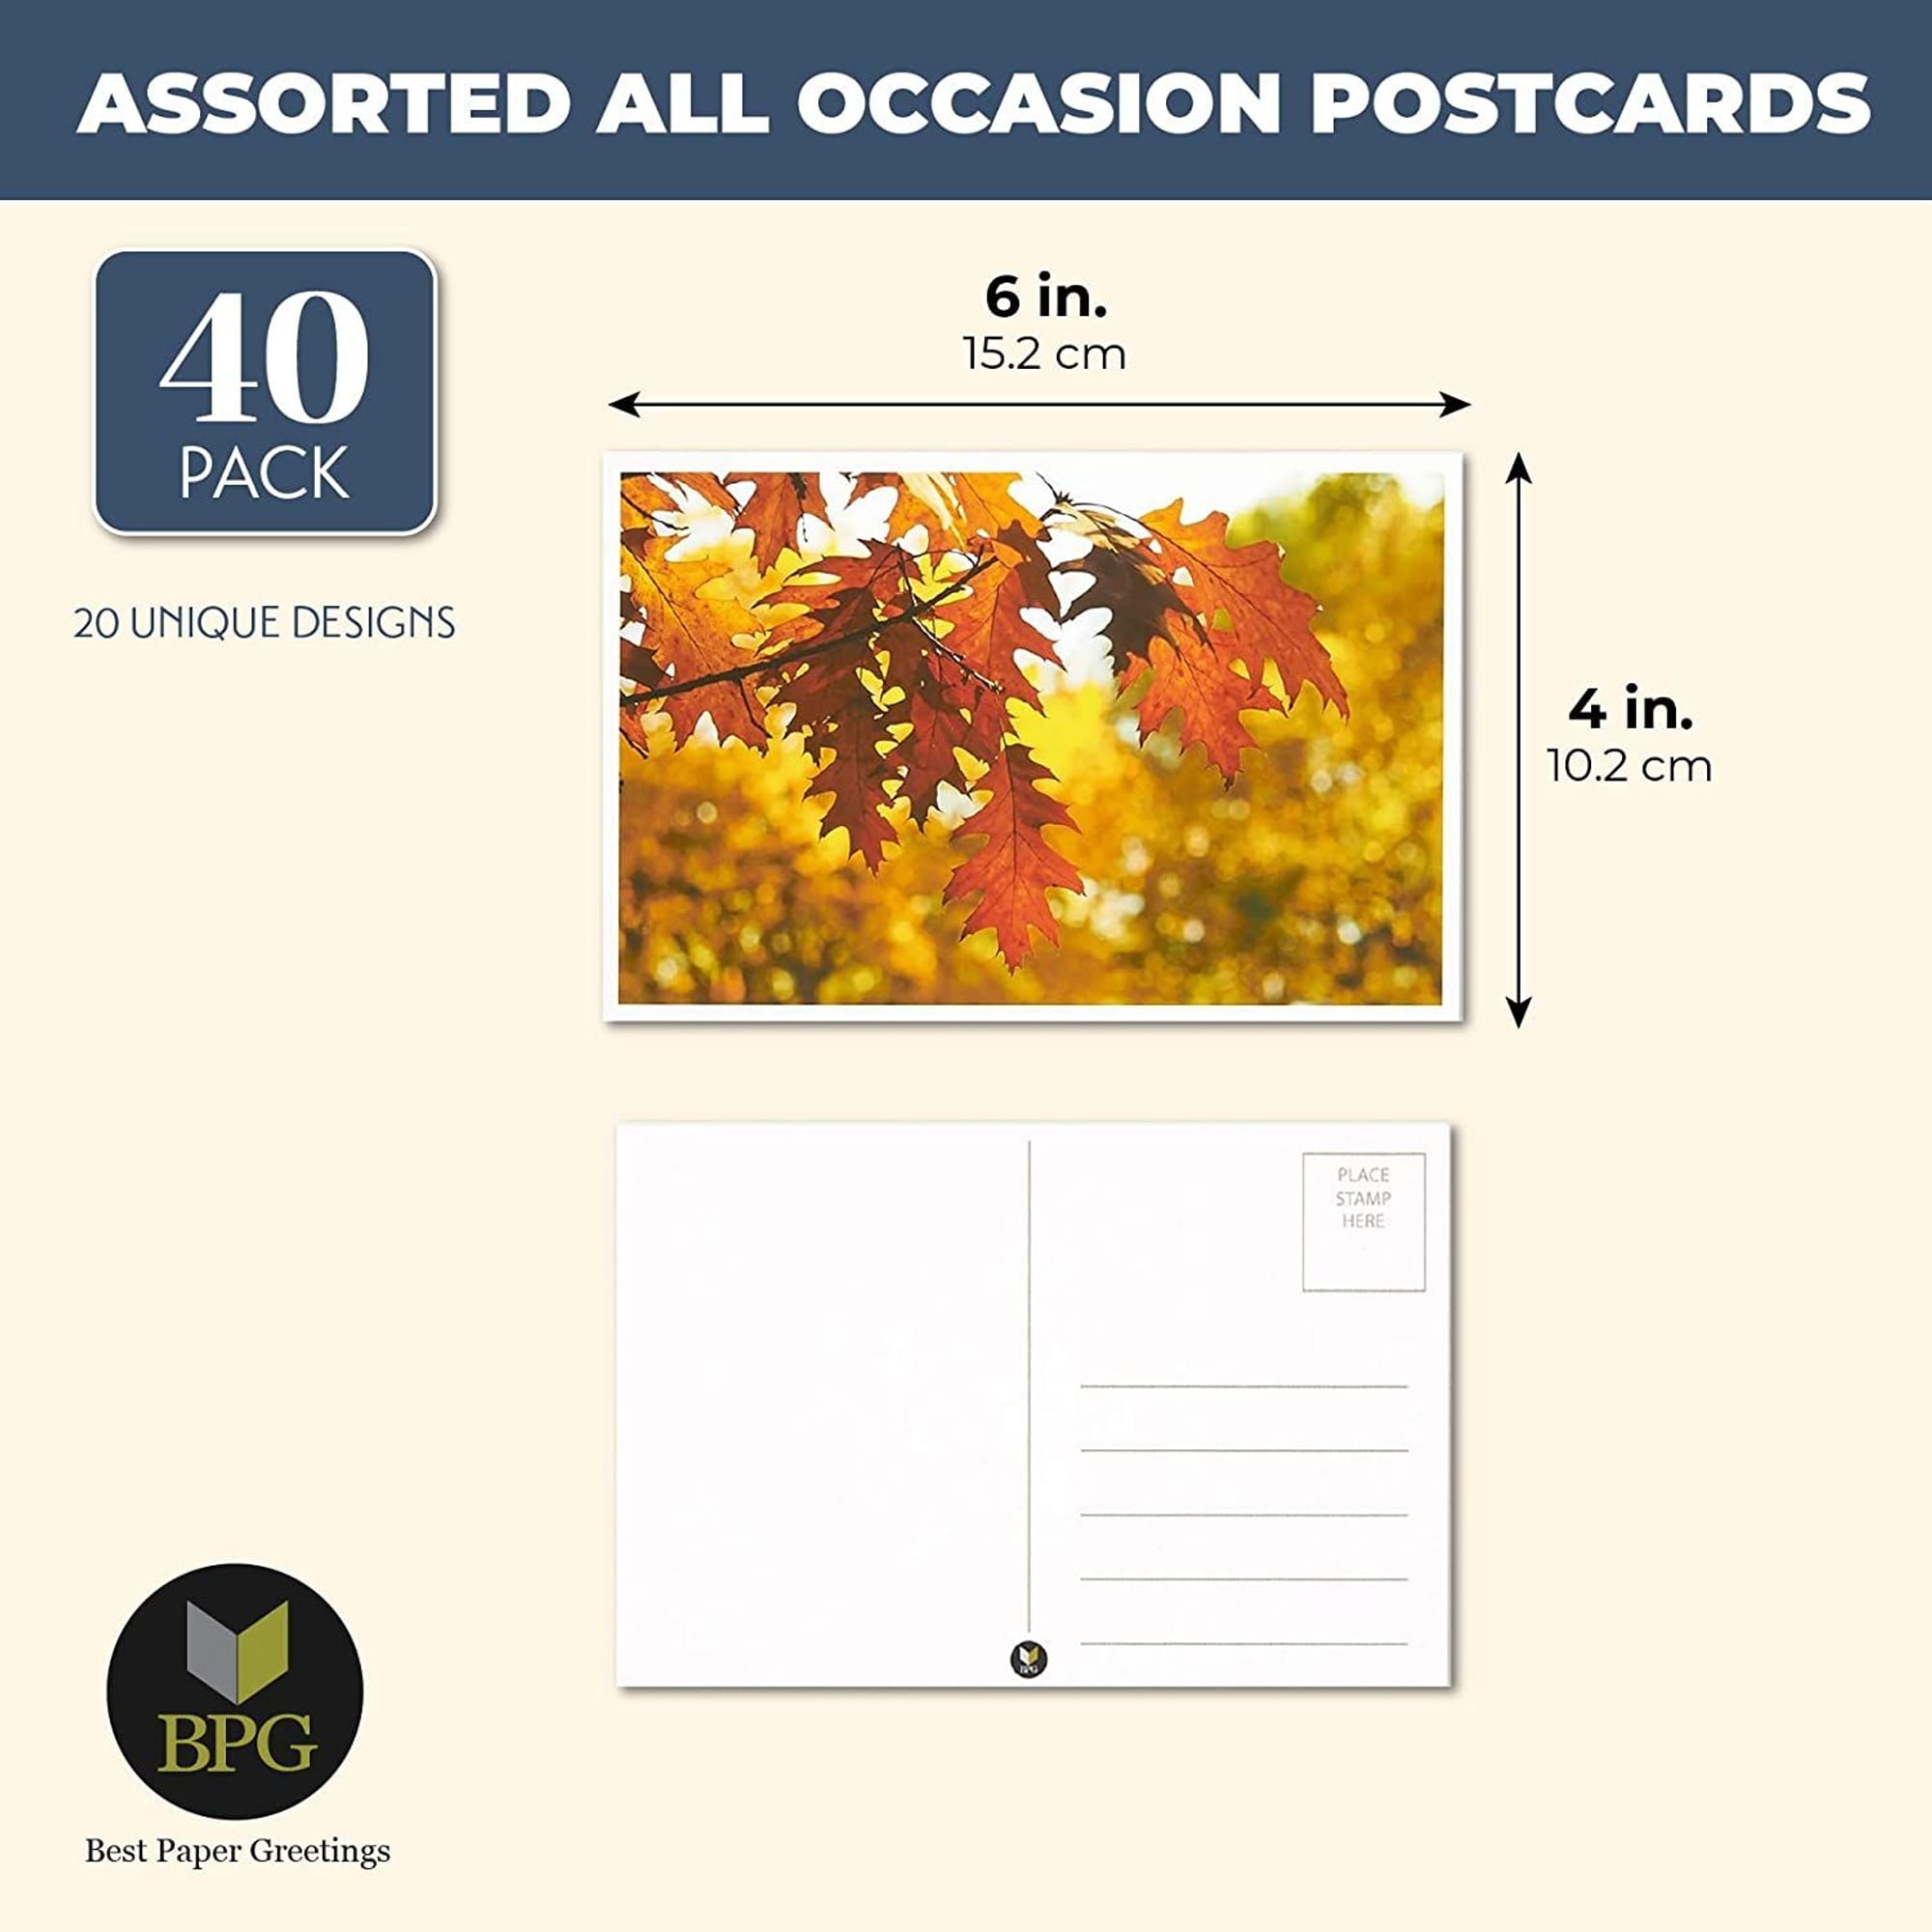 40 Pack Postcards - Four Seasons Postcards Print Variety Pack - Fall, Autumn, Winter, Summer, Spring Theme Self Mailer Postcards with Mailing Side 